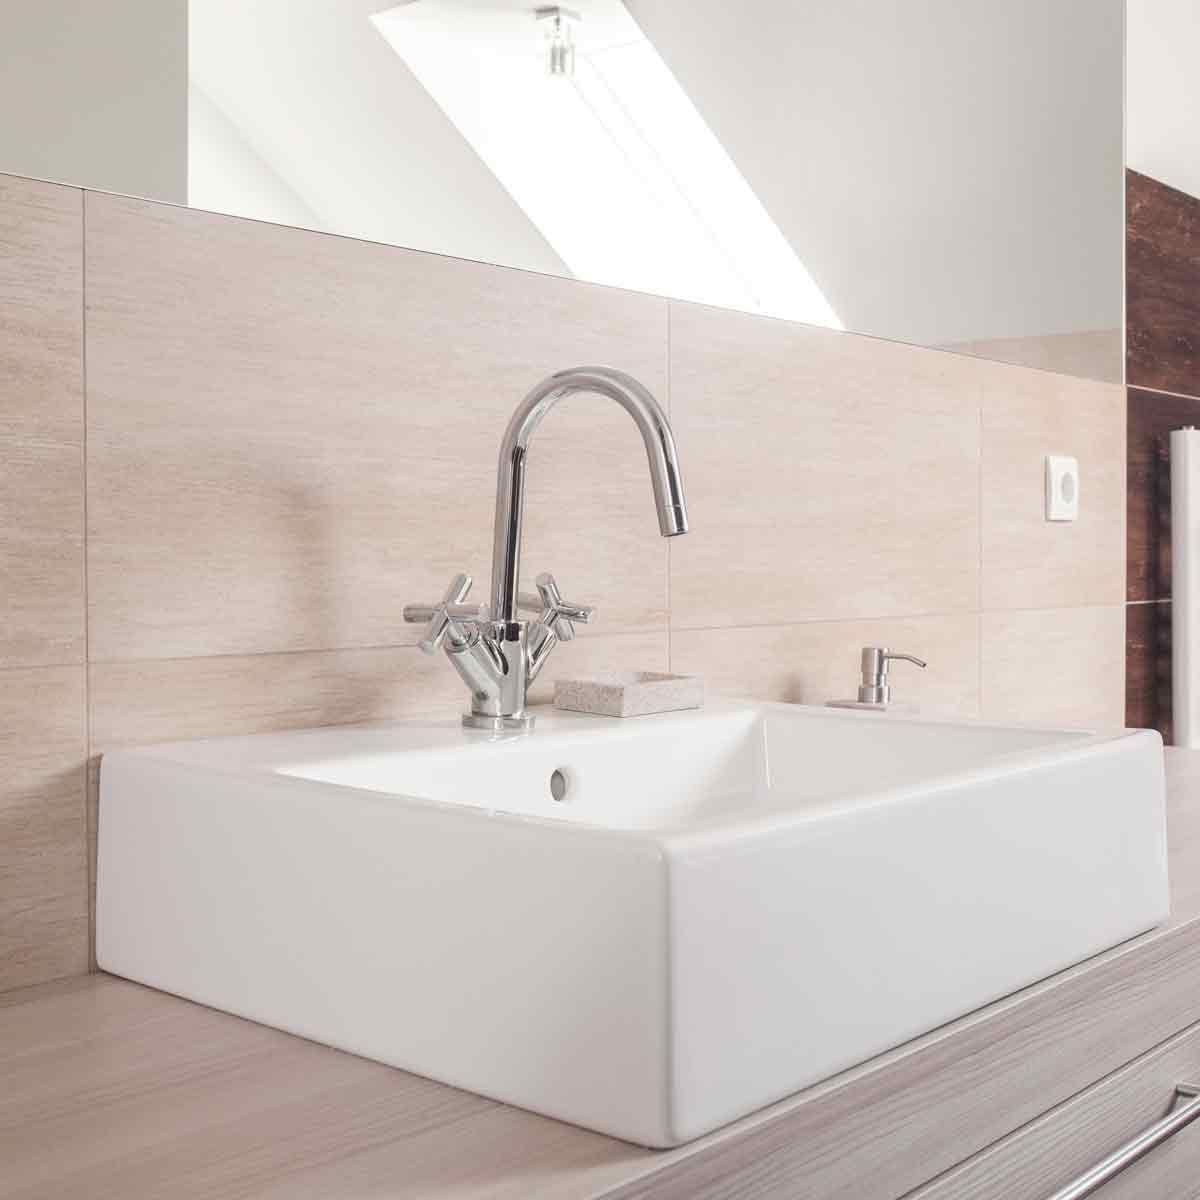 Neutral-colored-bathroom-with-Square-ceramic-sink-and-shiny-chrome-faucet